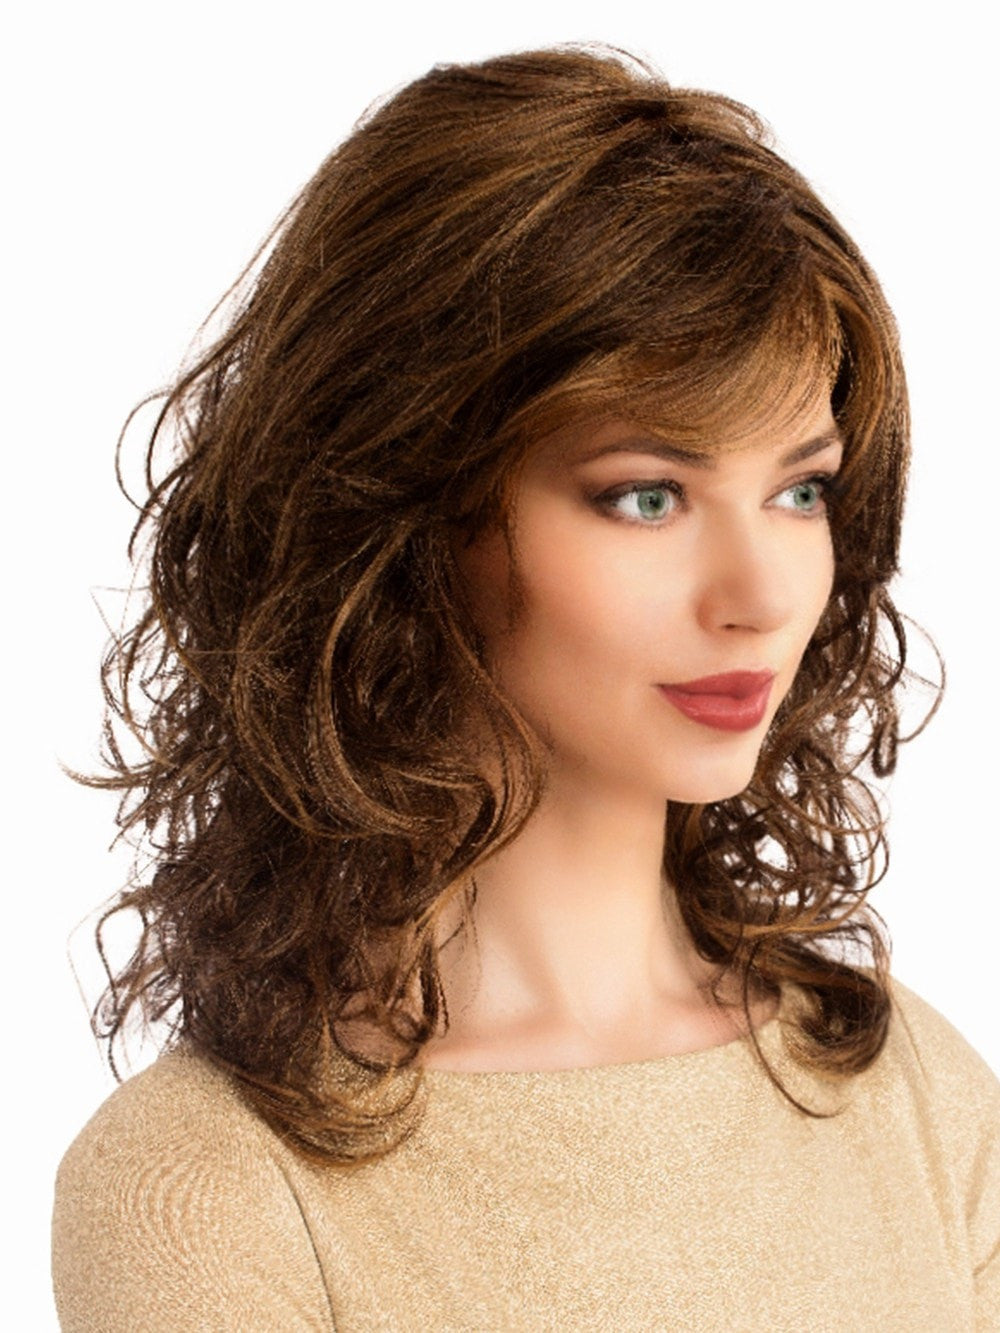 Long wavy curls on this synthetic wig, with a monofilament top, see video for details